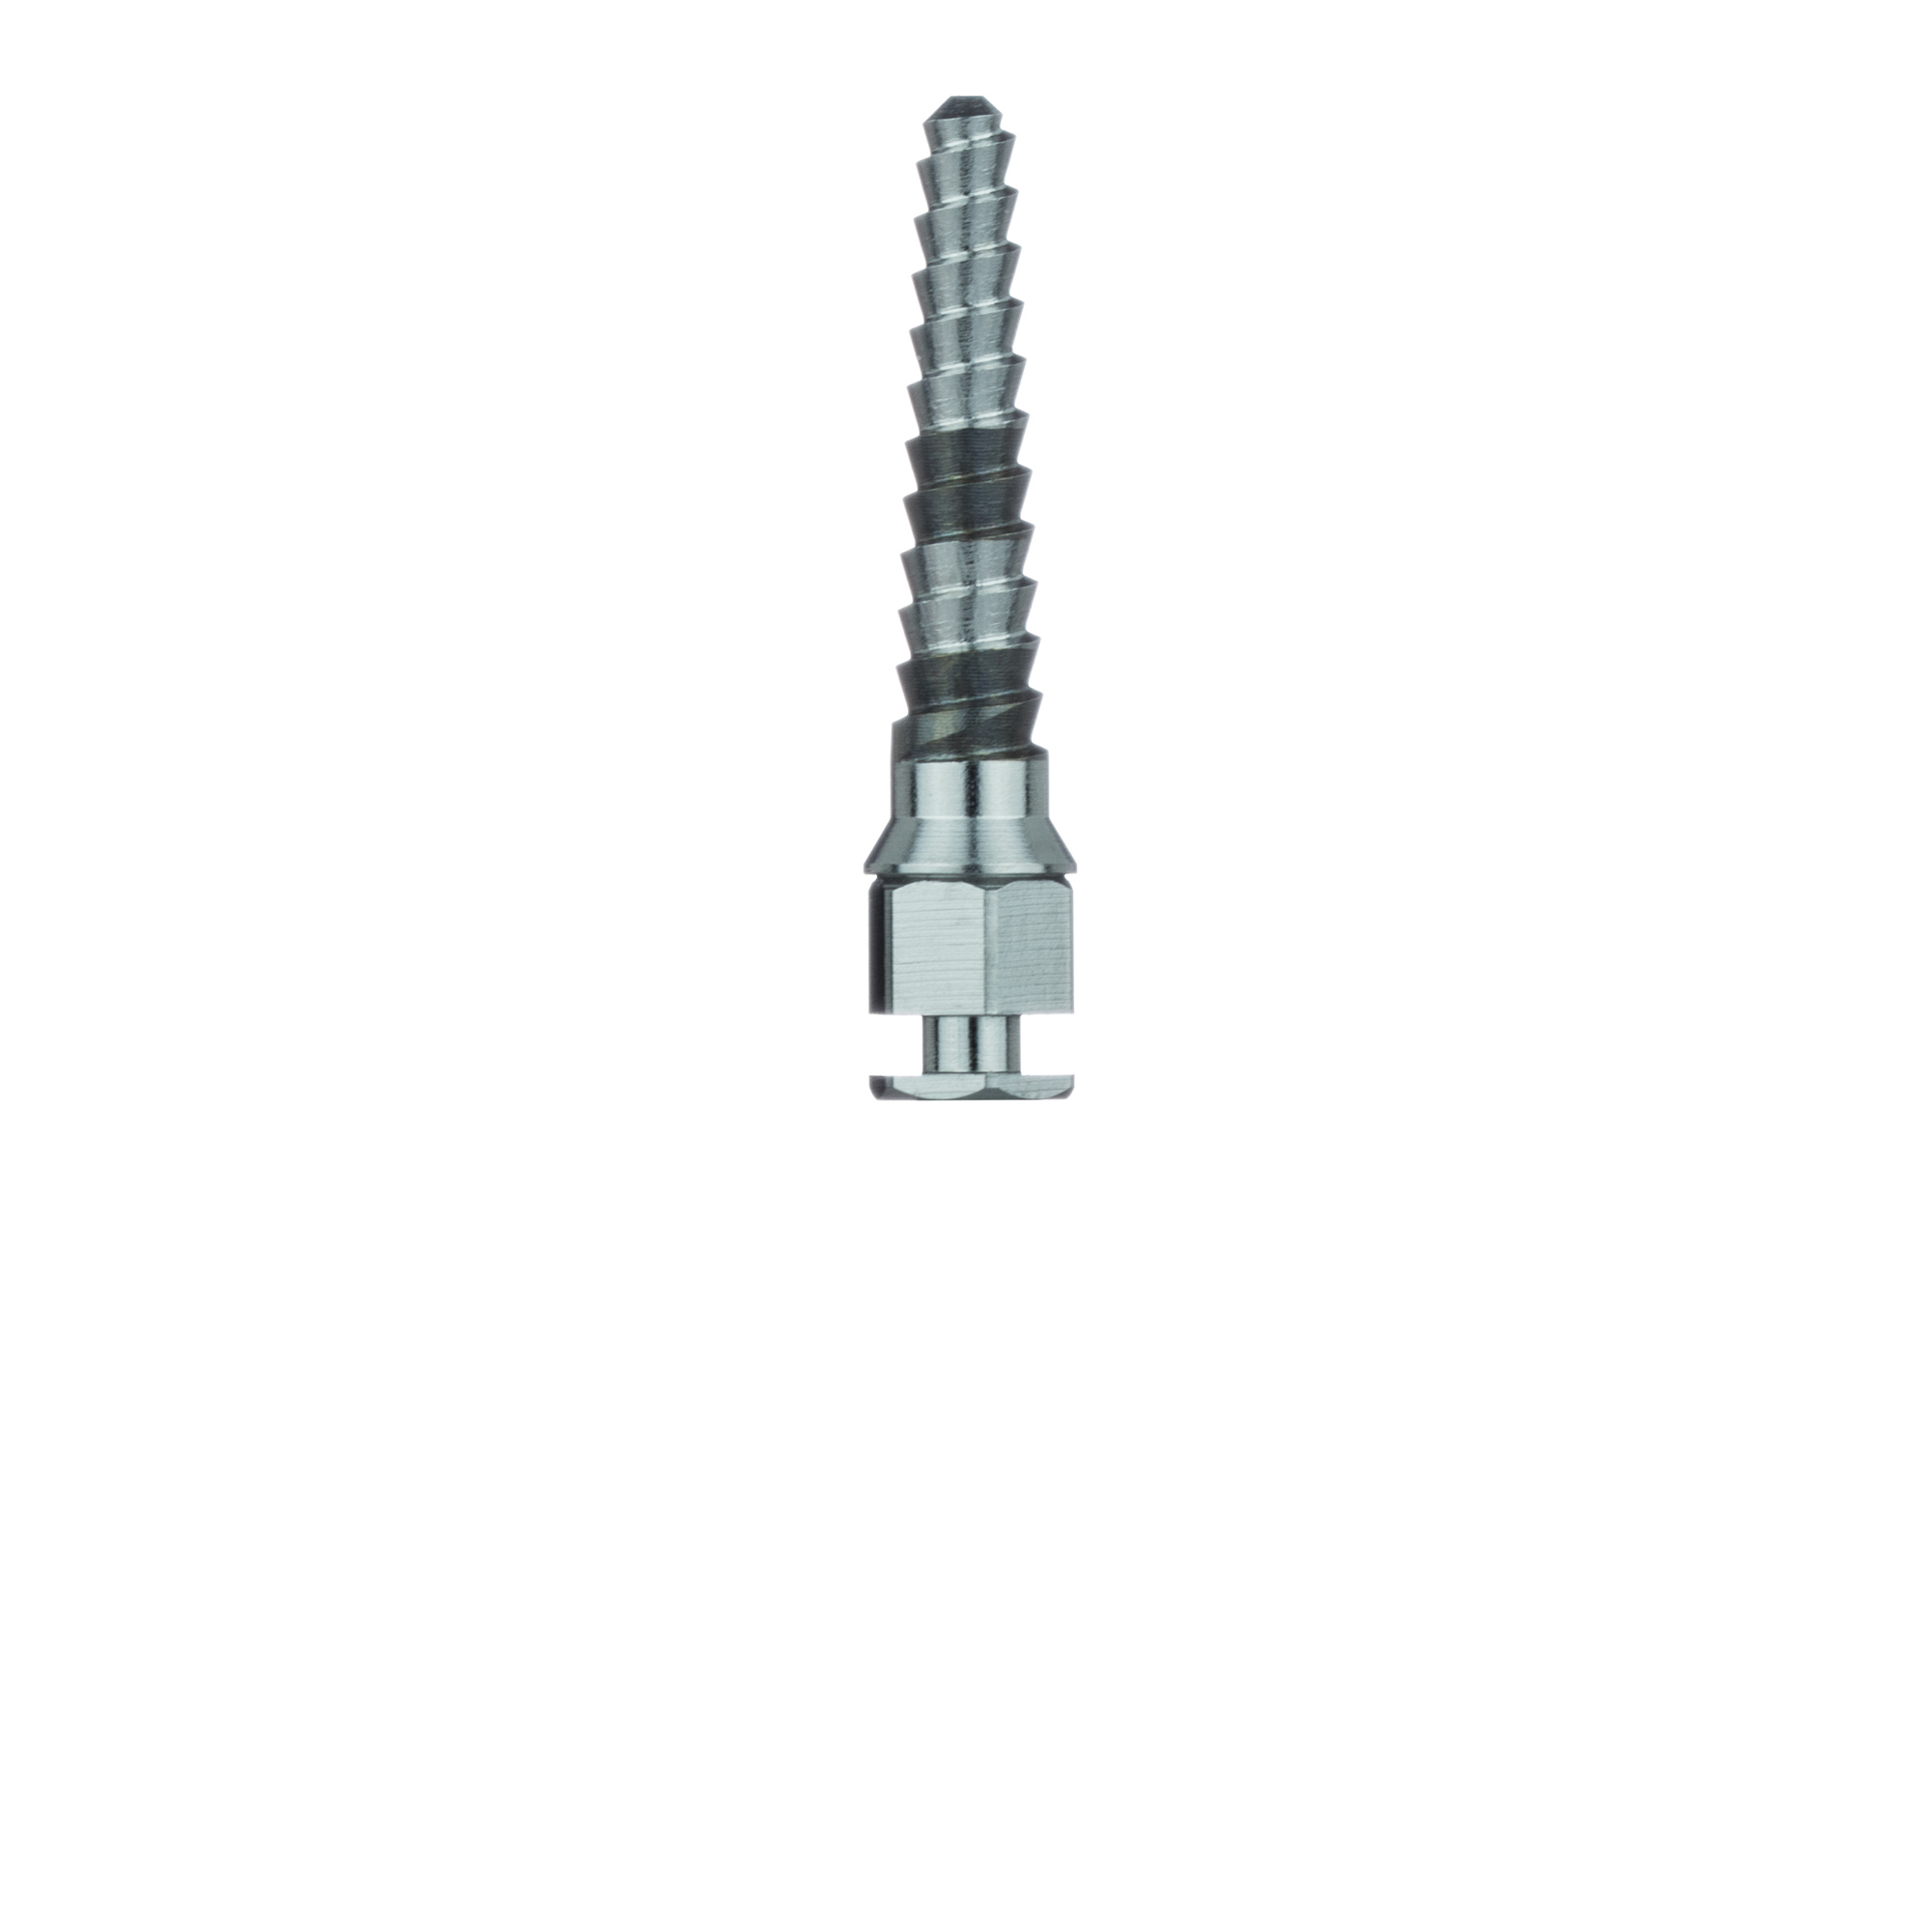 B2005 Surgery, Expansion Spreader, 2.9mm X 12mm